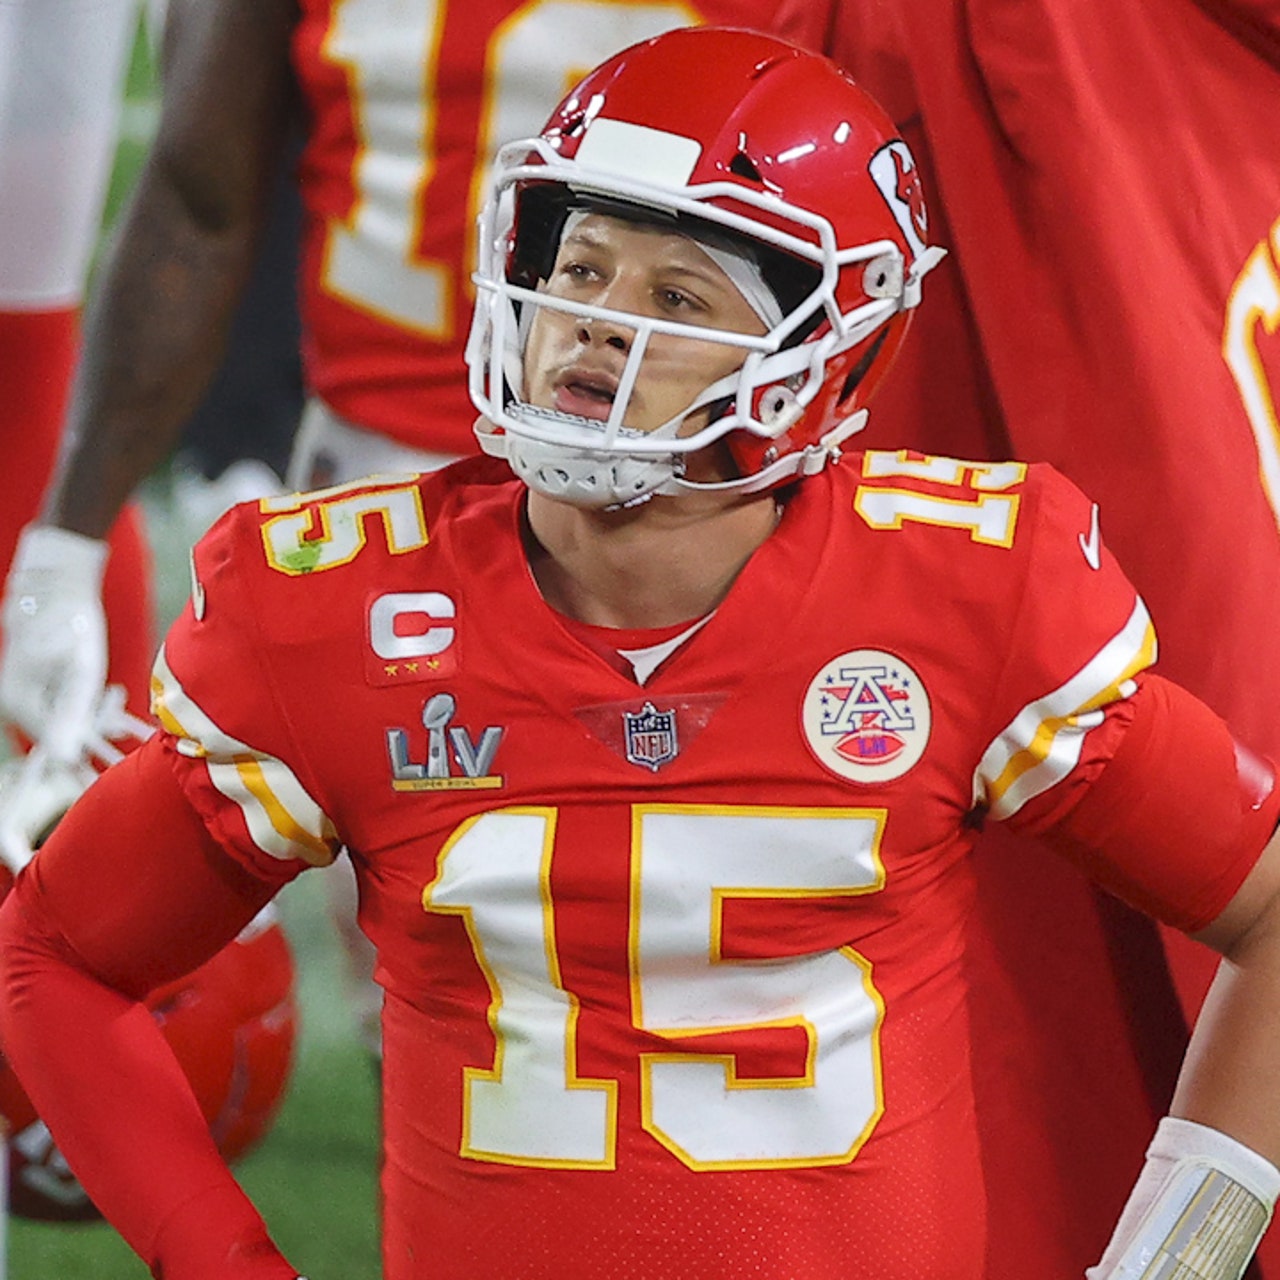 Kontrakt køn Fundament Marcellus Wiley: It's time to pump your breaks on the Patrick Mahomes hype  ' SPEAK FOR YOURSELF | FOX Sports